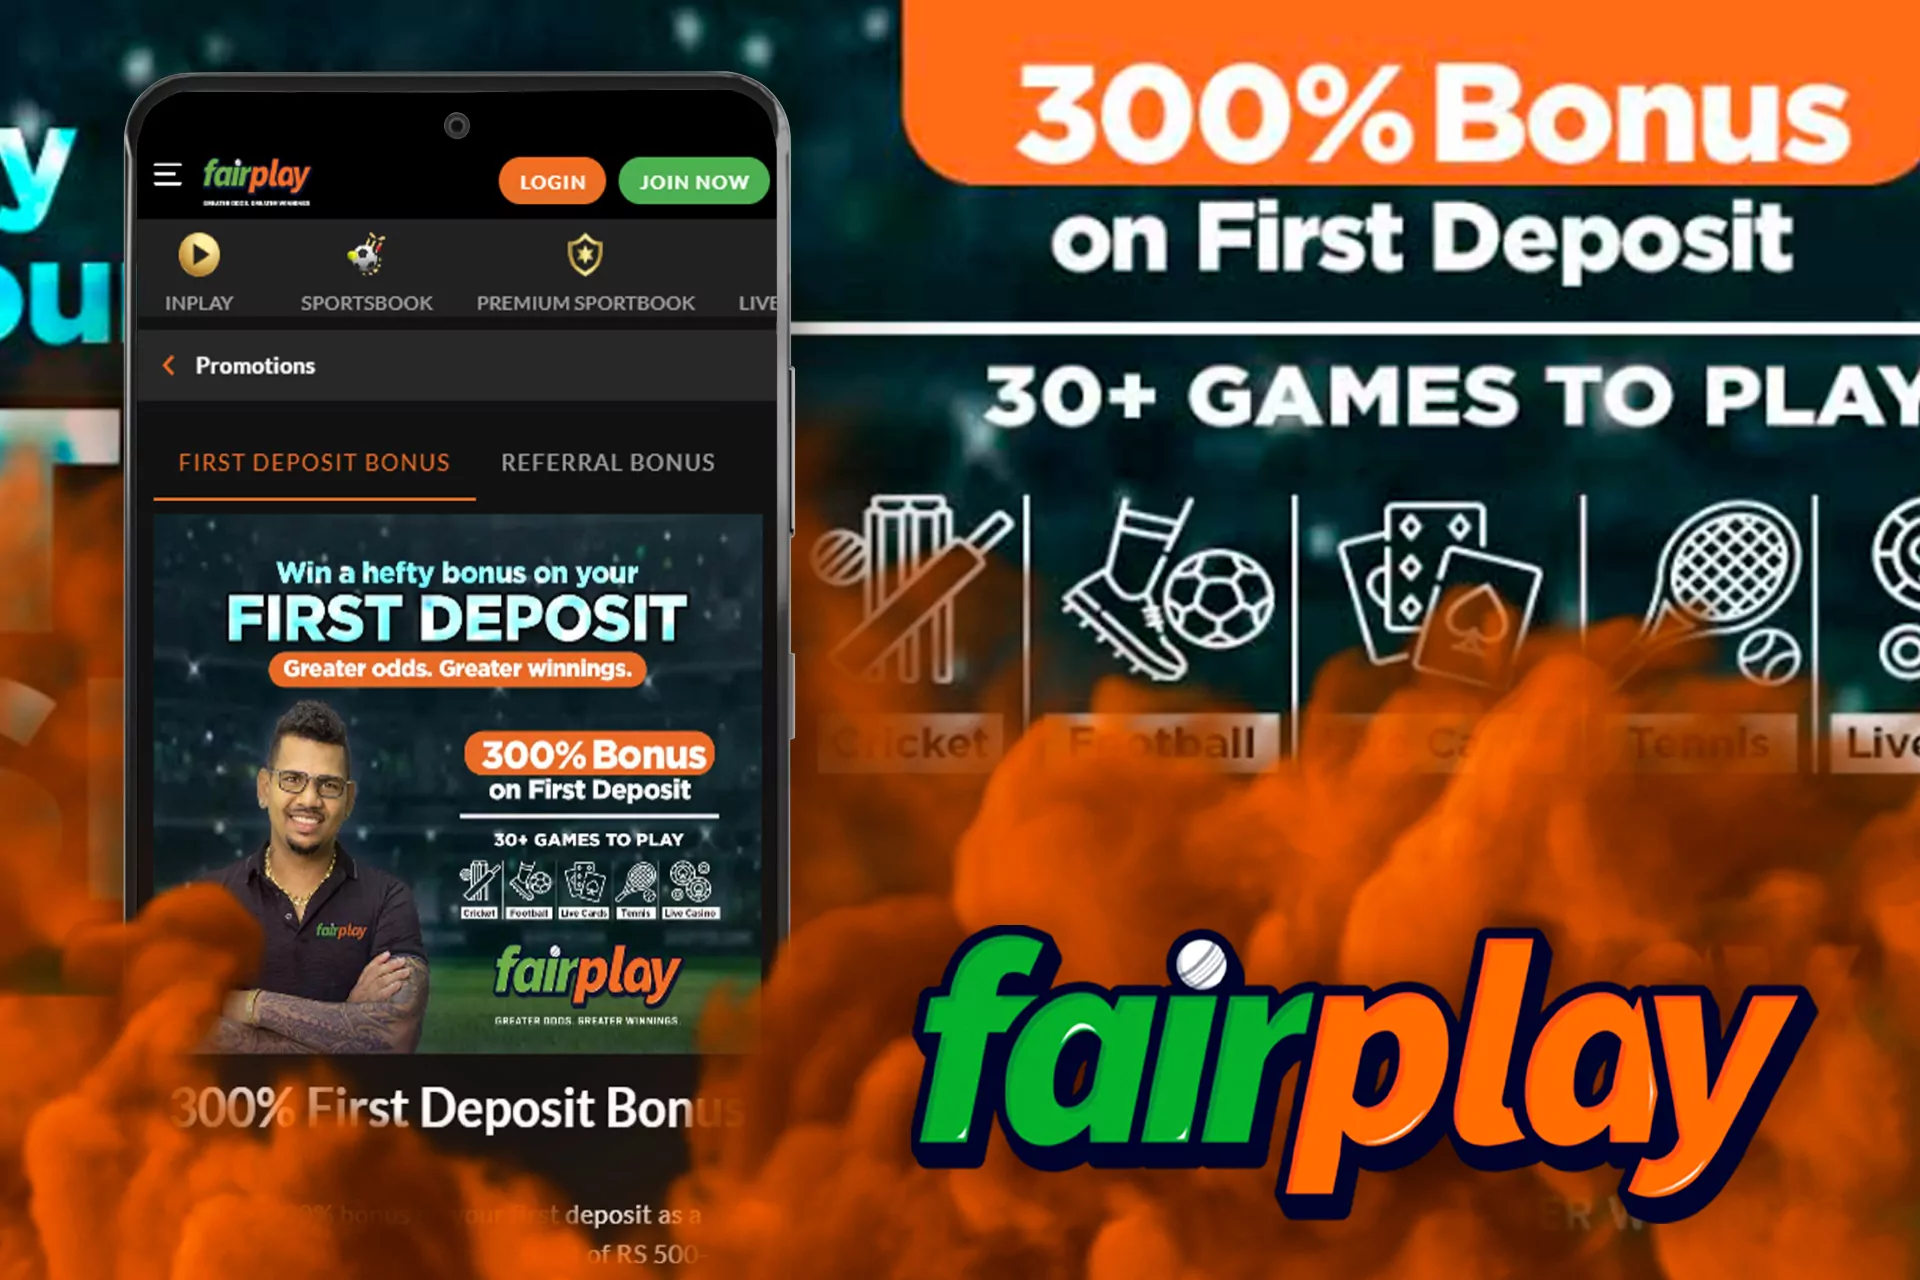 Make a deposit in the Fairplay app and get up to a 300% bonus.